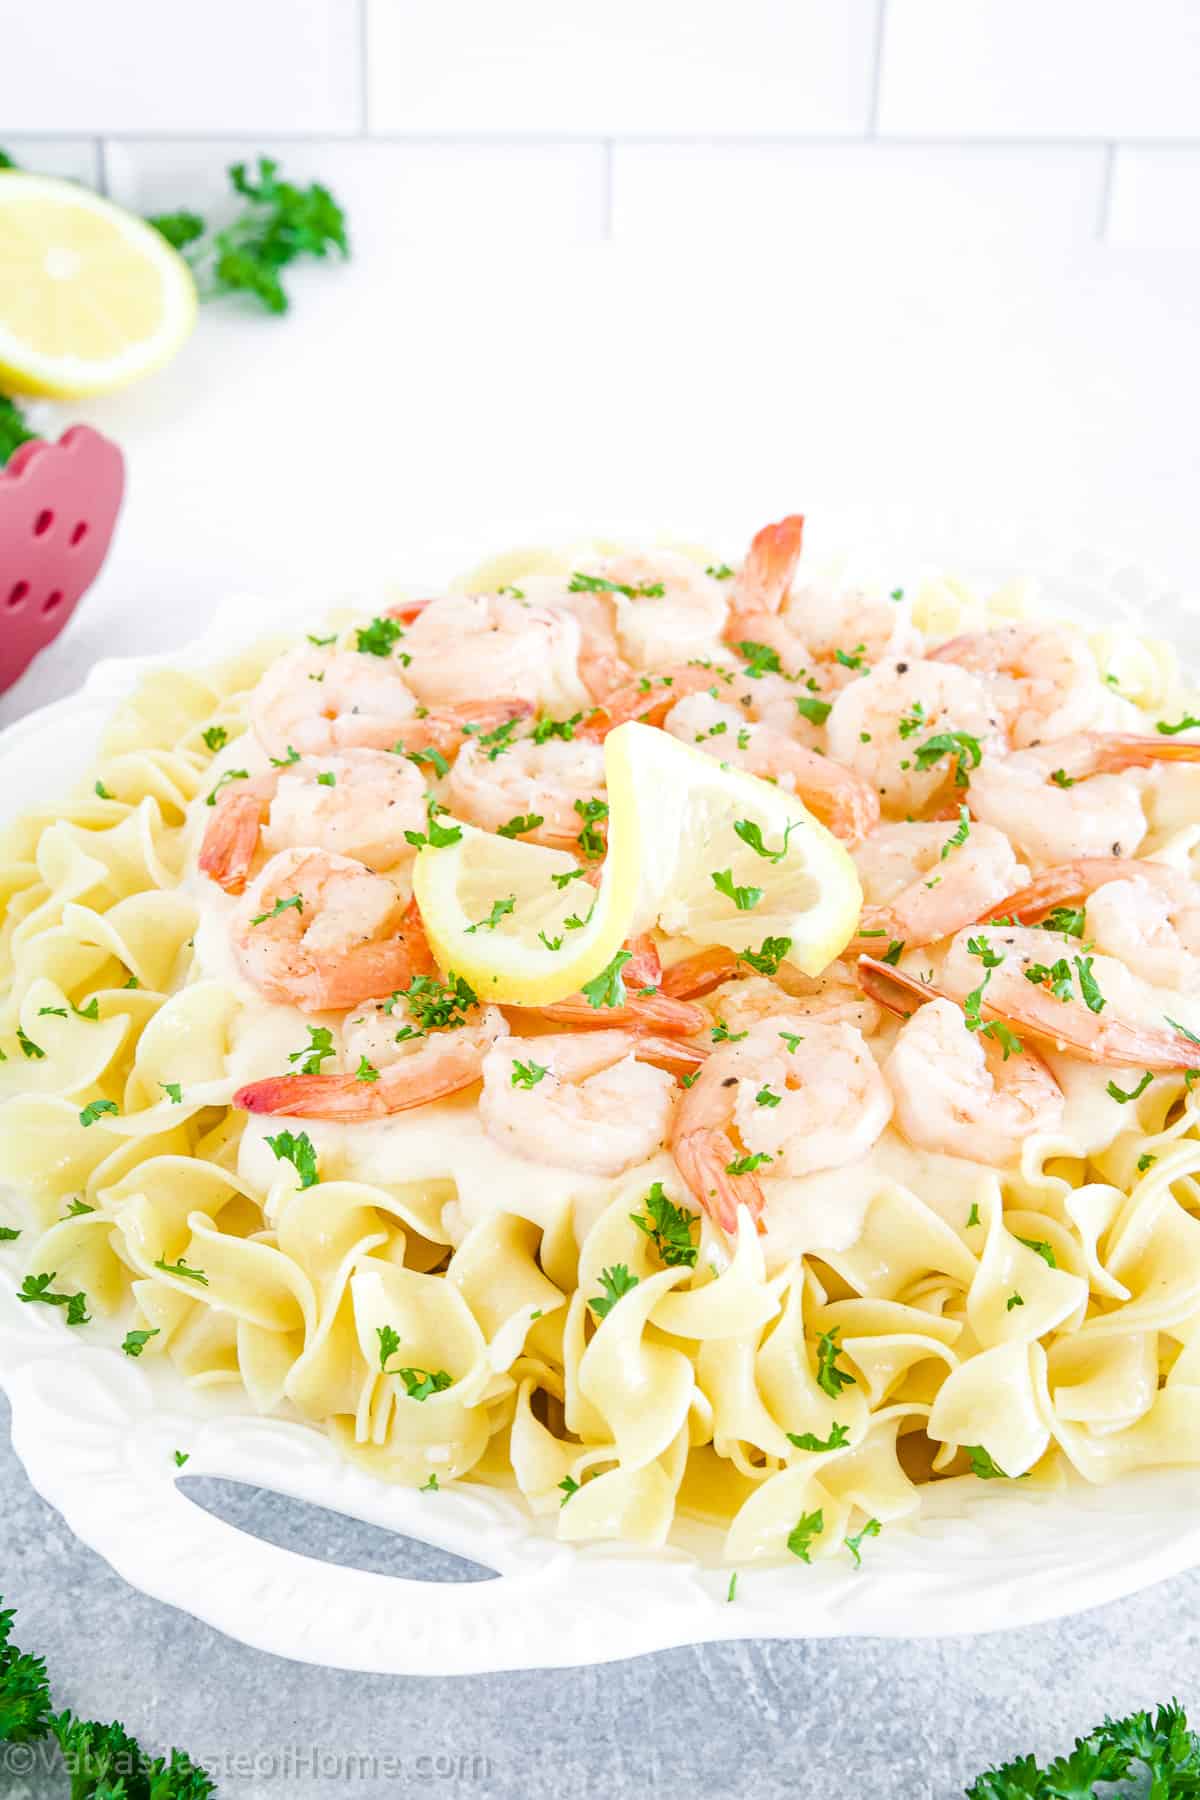 This Shrimp Alfredo Pasta features large shrimp cooked to perfection are covered in a velvety sauce flavored with butter, lemon, and a touch of seasoning. 